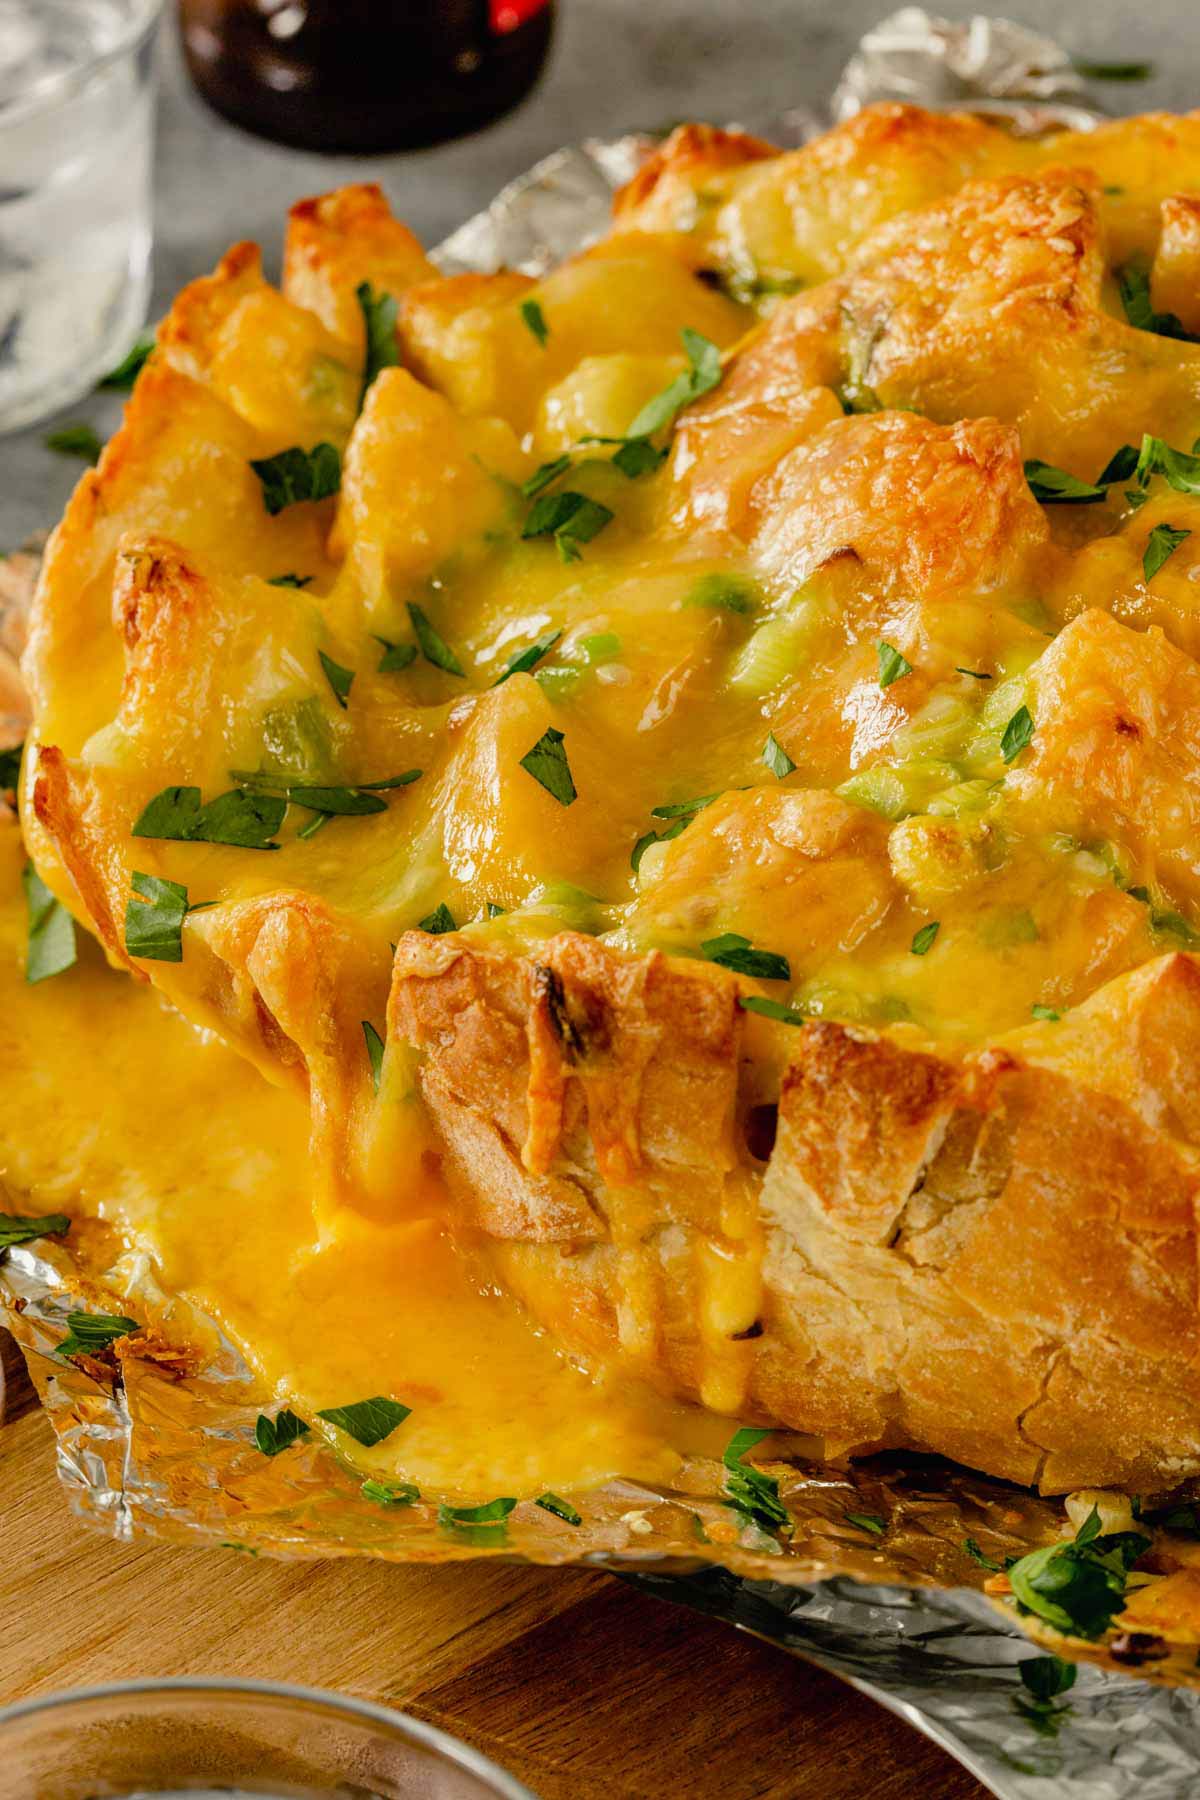 Side view of pull-apart bread with melted cheese on the side.